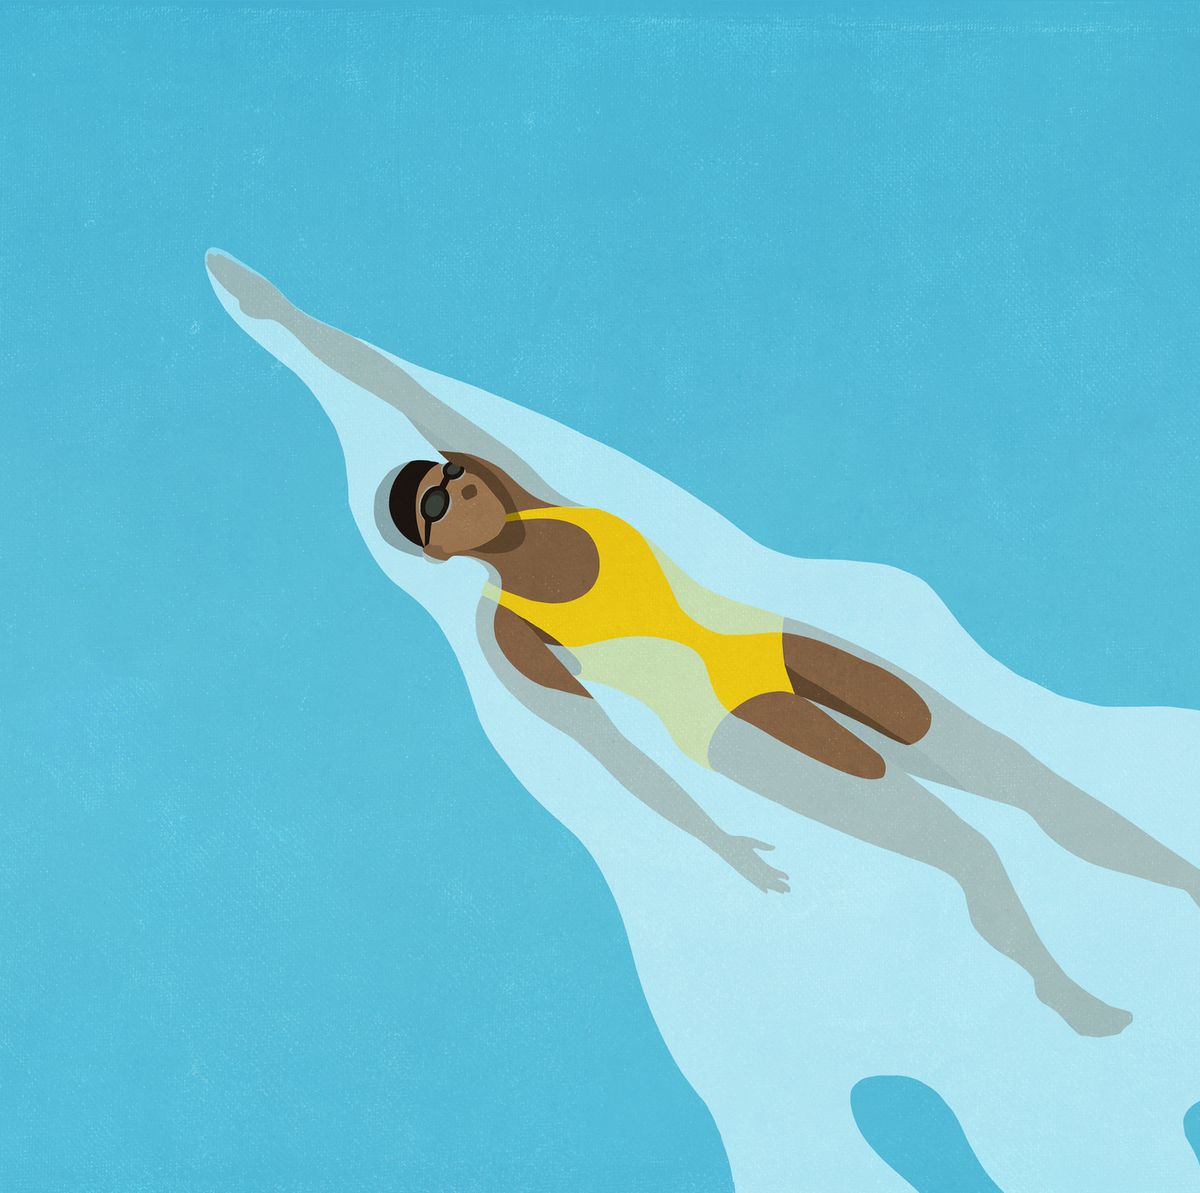 About black people learning to swim - Swimming Without Stress